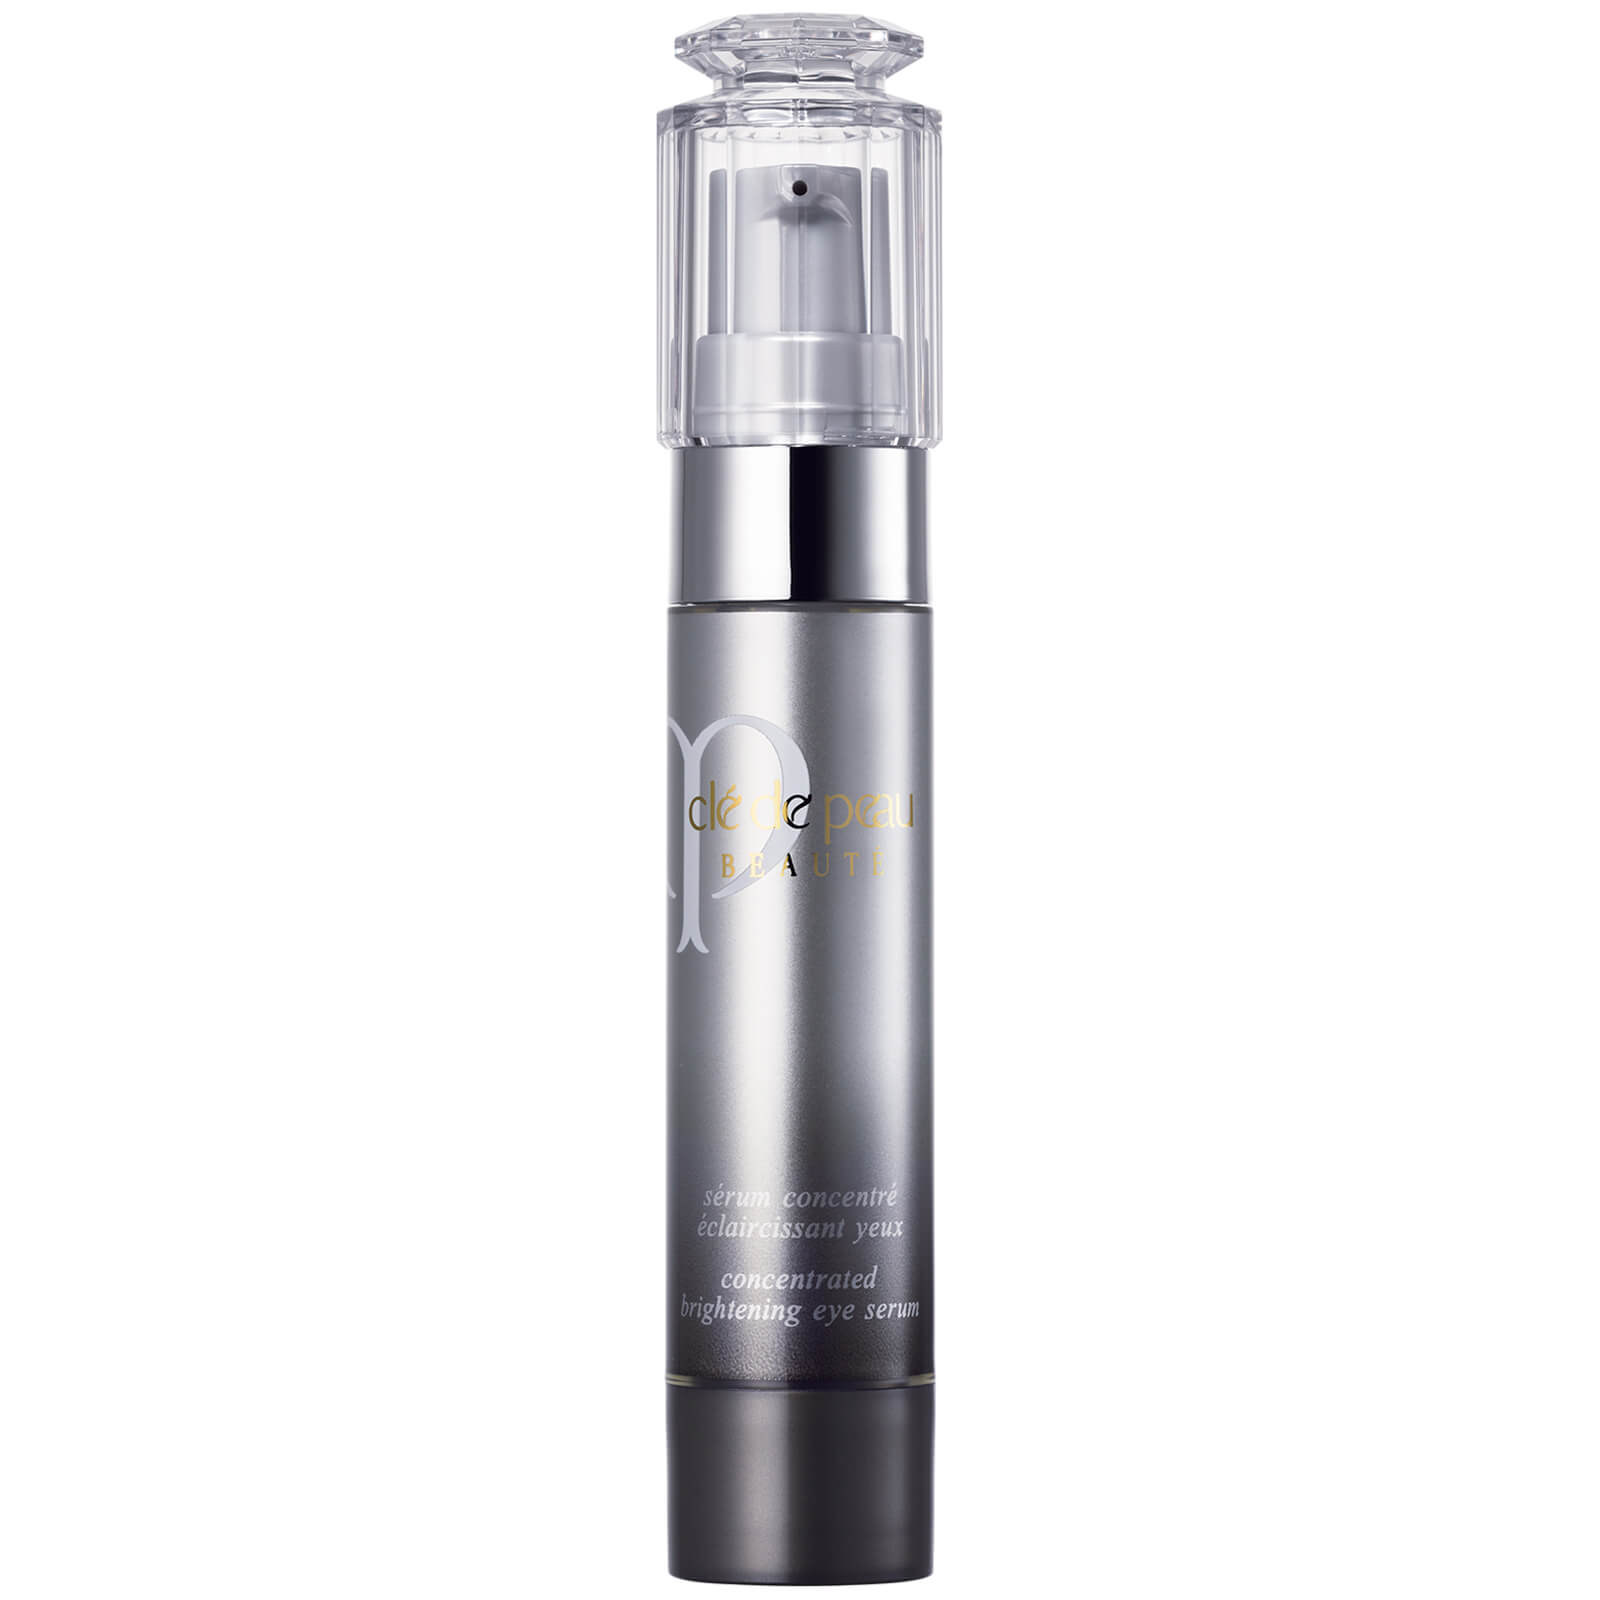 Cle de Peau Beaute Concentrated Brightening Eye Serum 15ml